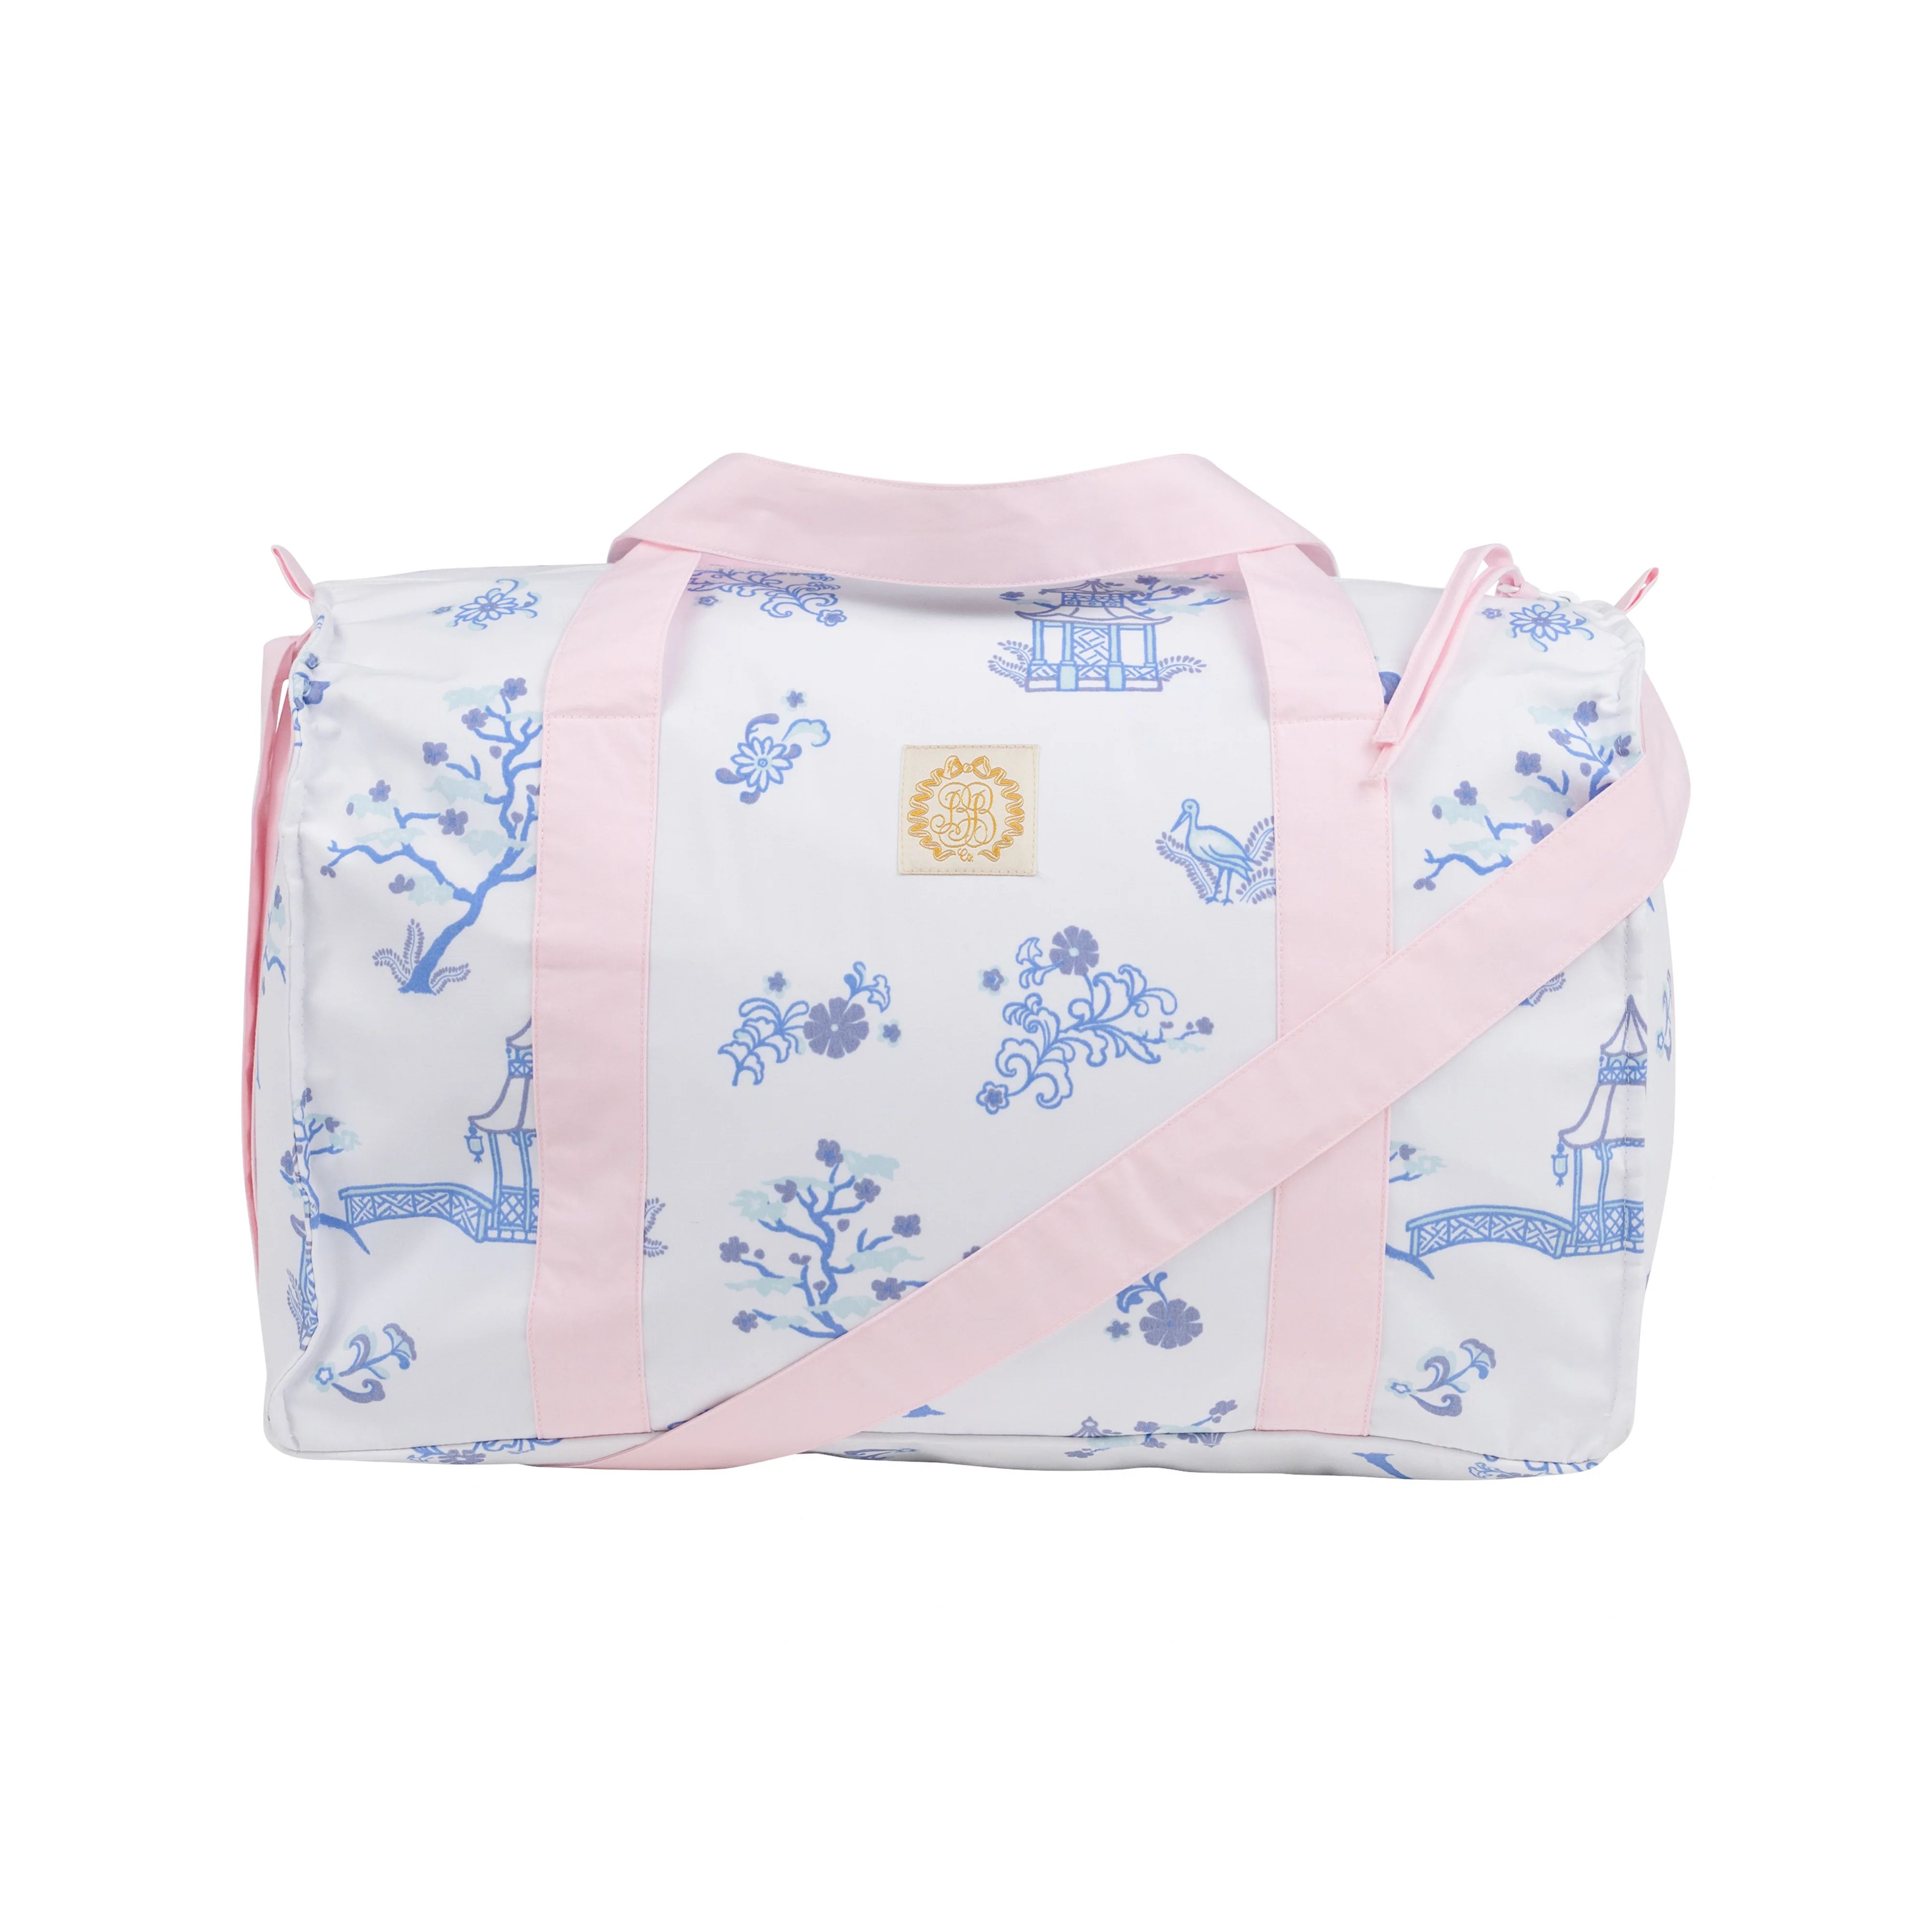 Stewart Sleepover Tote - Sir Proper's Pagoda with Palm Beach Pink | The Beaufort Bonnet Company